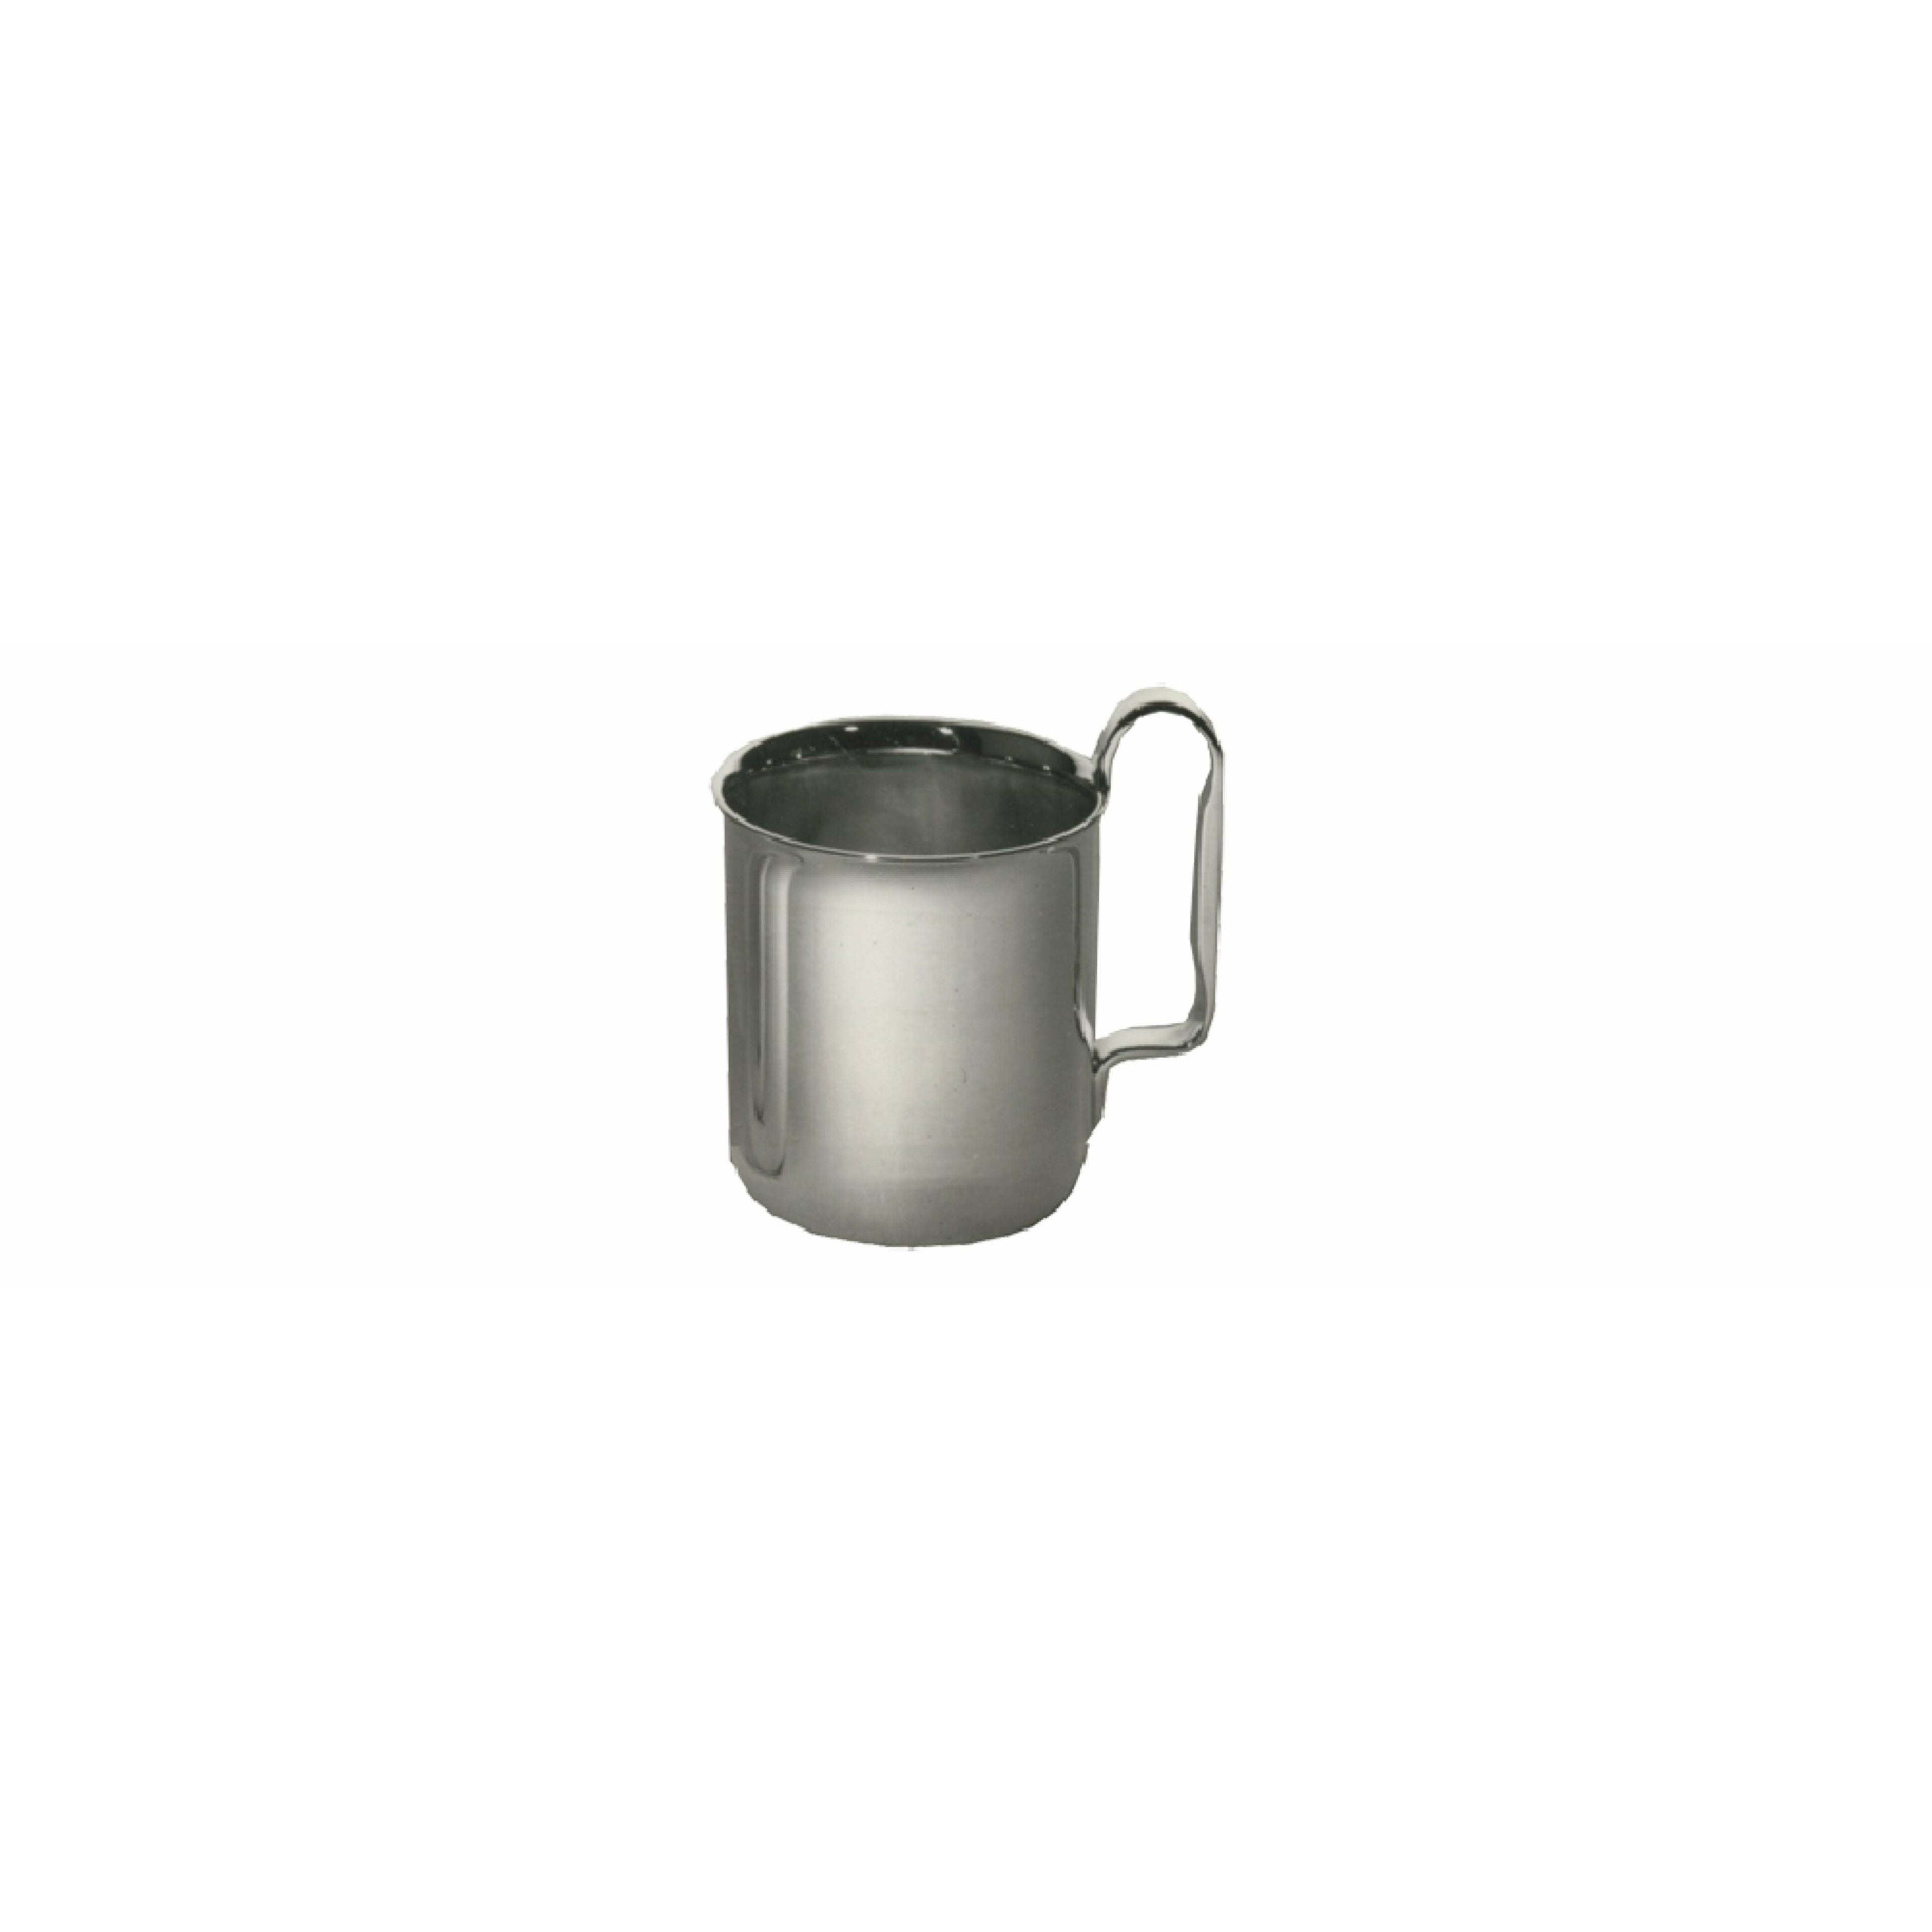 Kay Bojesen The Child's Cup With Handle, Polished Steel